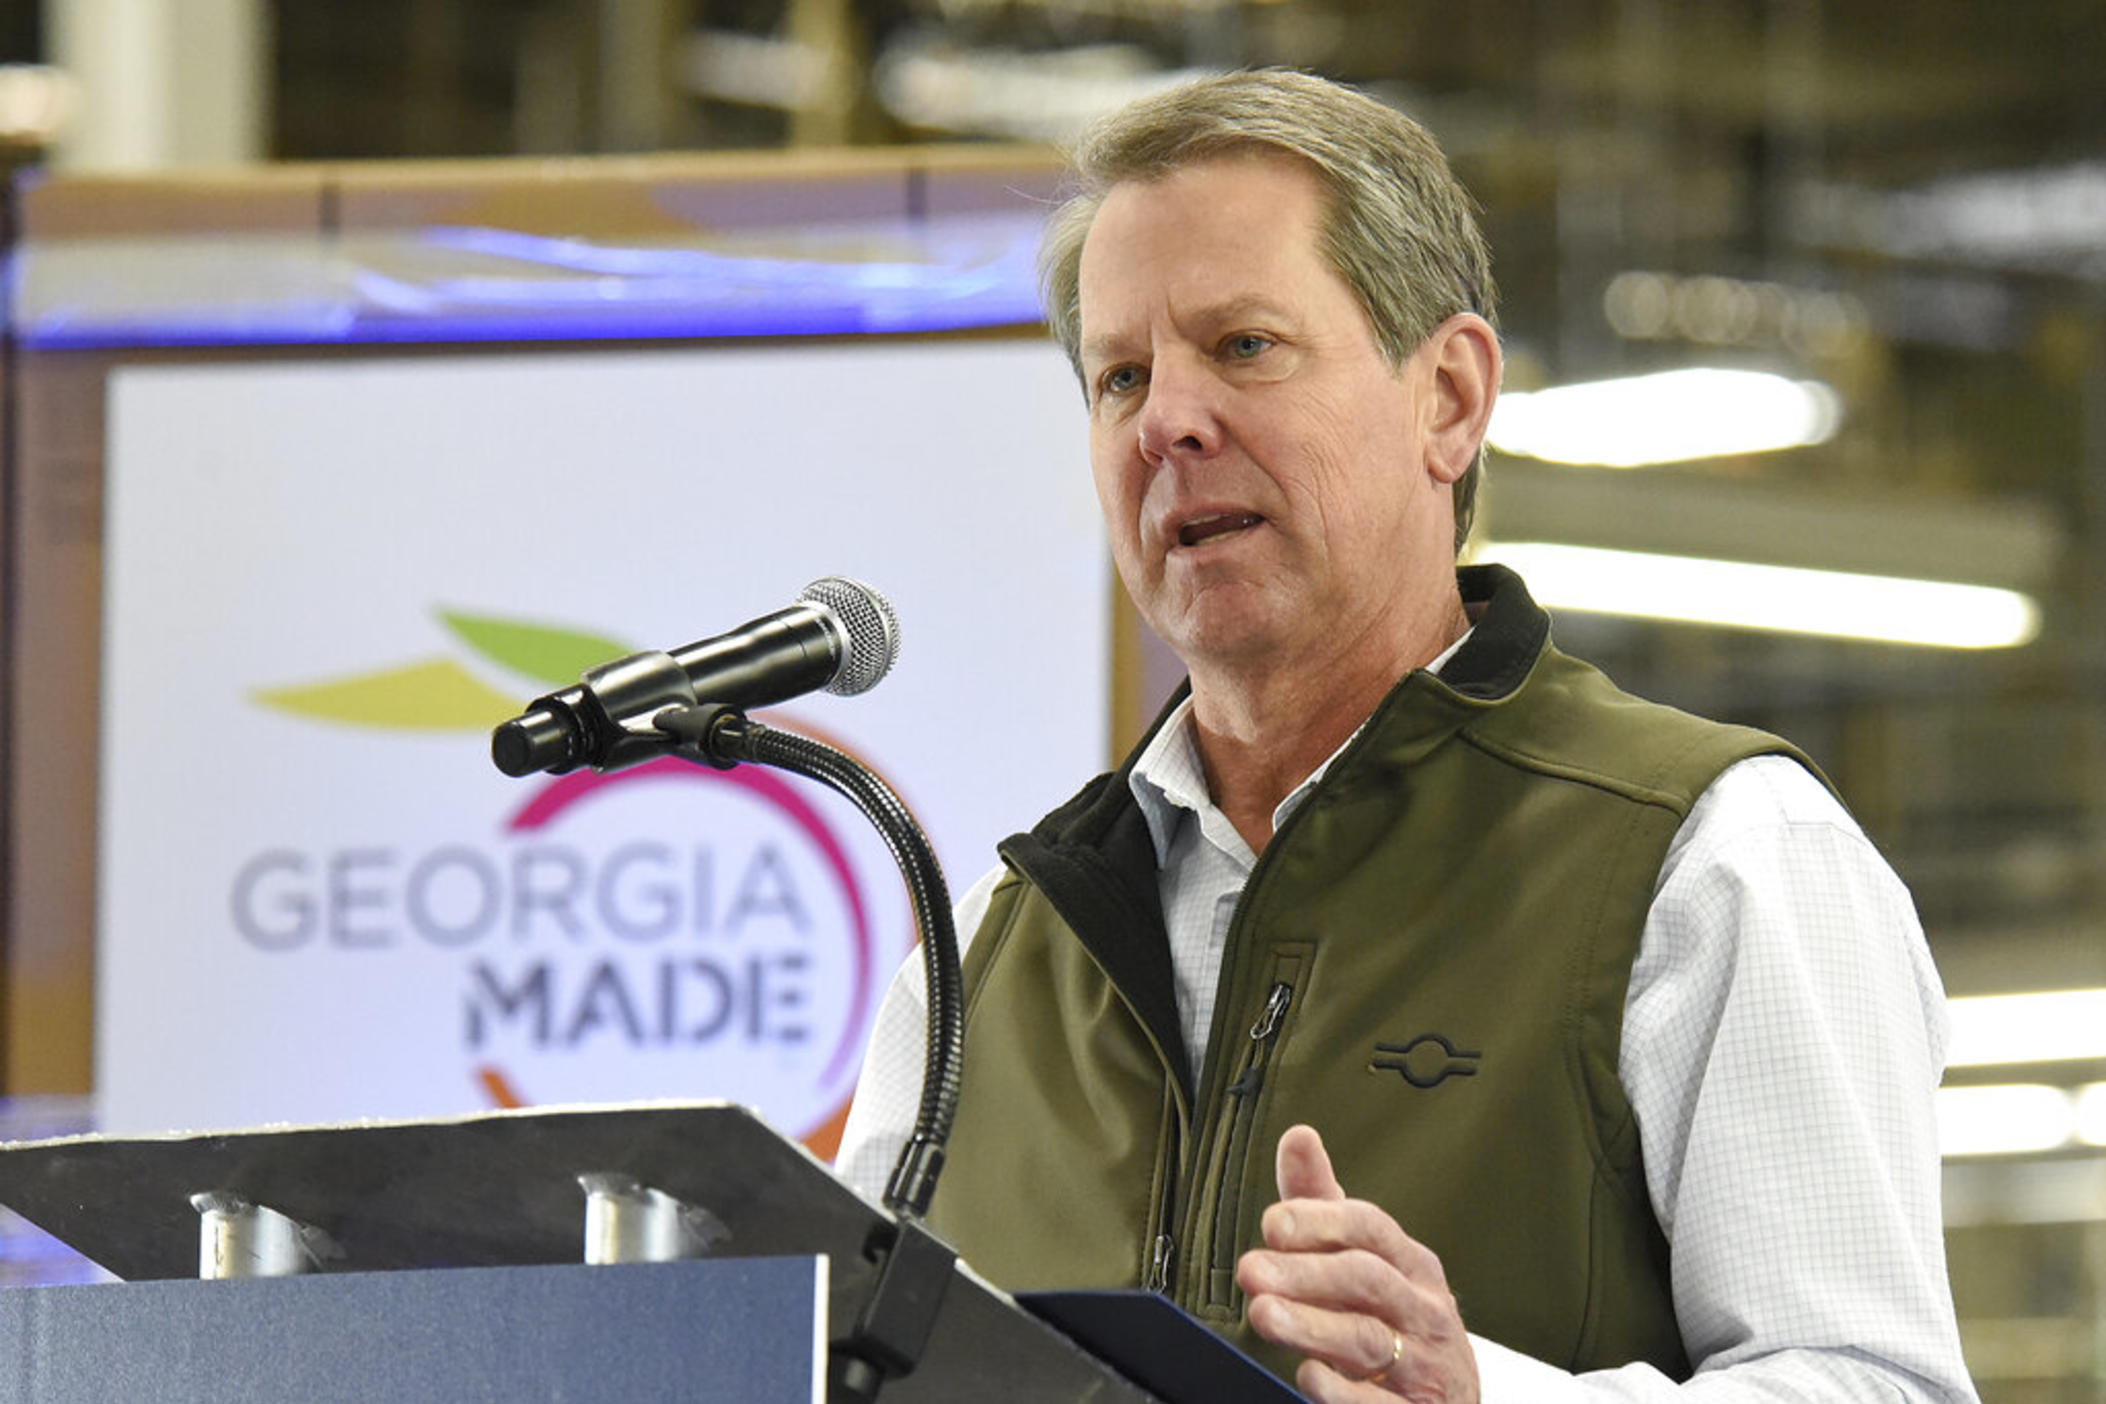 Georgia Gov. Brian Kemp speaks at the Roper Corporation Cooking Products Plant in Lafayette, Ga. on Friday, Jan. 7, 2022. Kemp visited the plant after GE Appliances recently invested a $118 million expansion in Georgia.